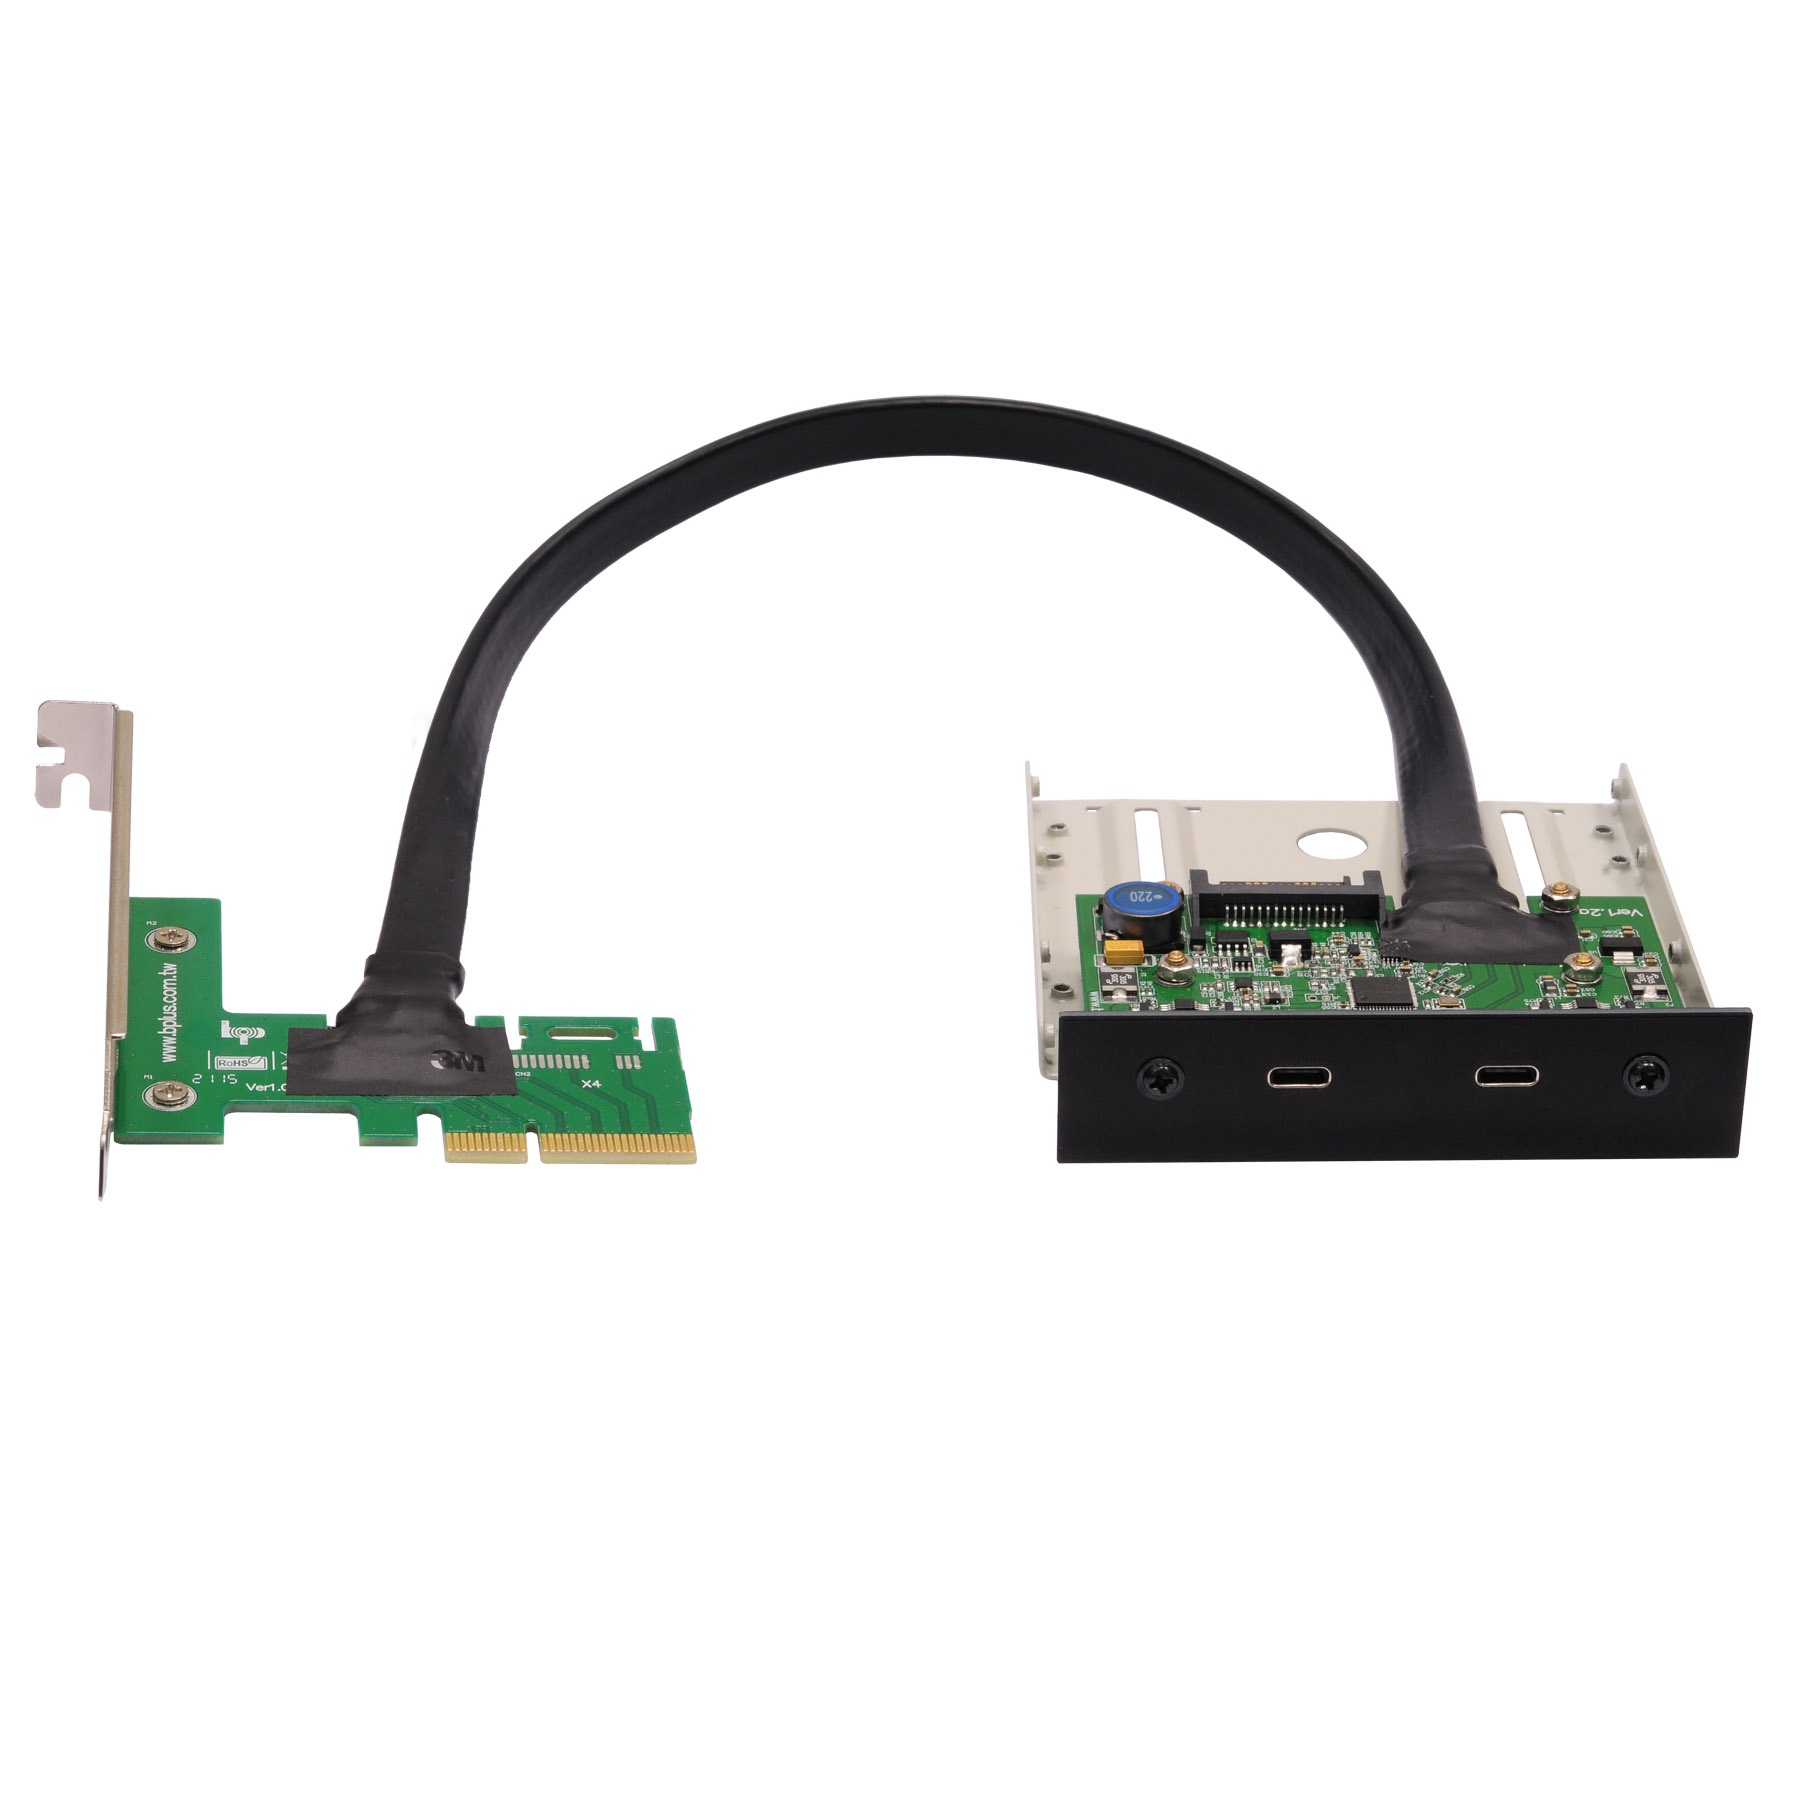 Andifany USB 3.1 Type C Pcie Expansion Card Pci-E to 1 Type C and 2 Type A 3.0 USB Pci Express Controller Hub for Desktop Pc